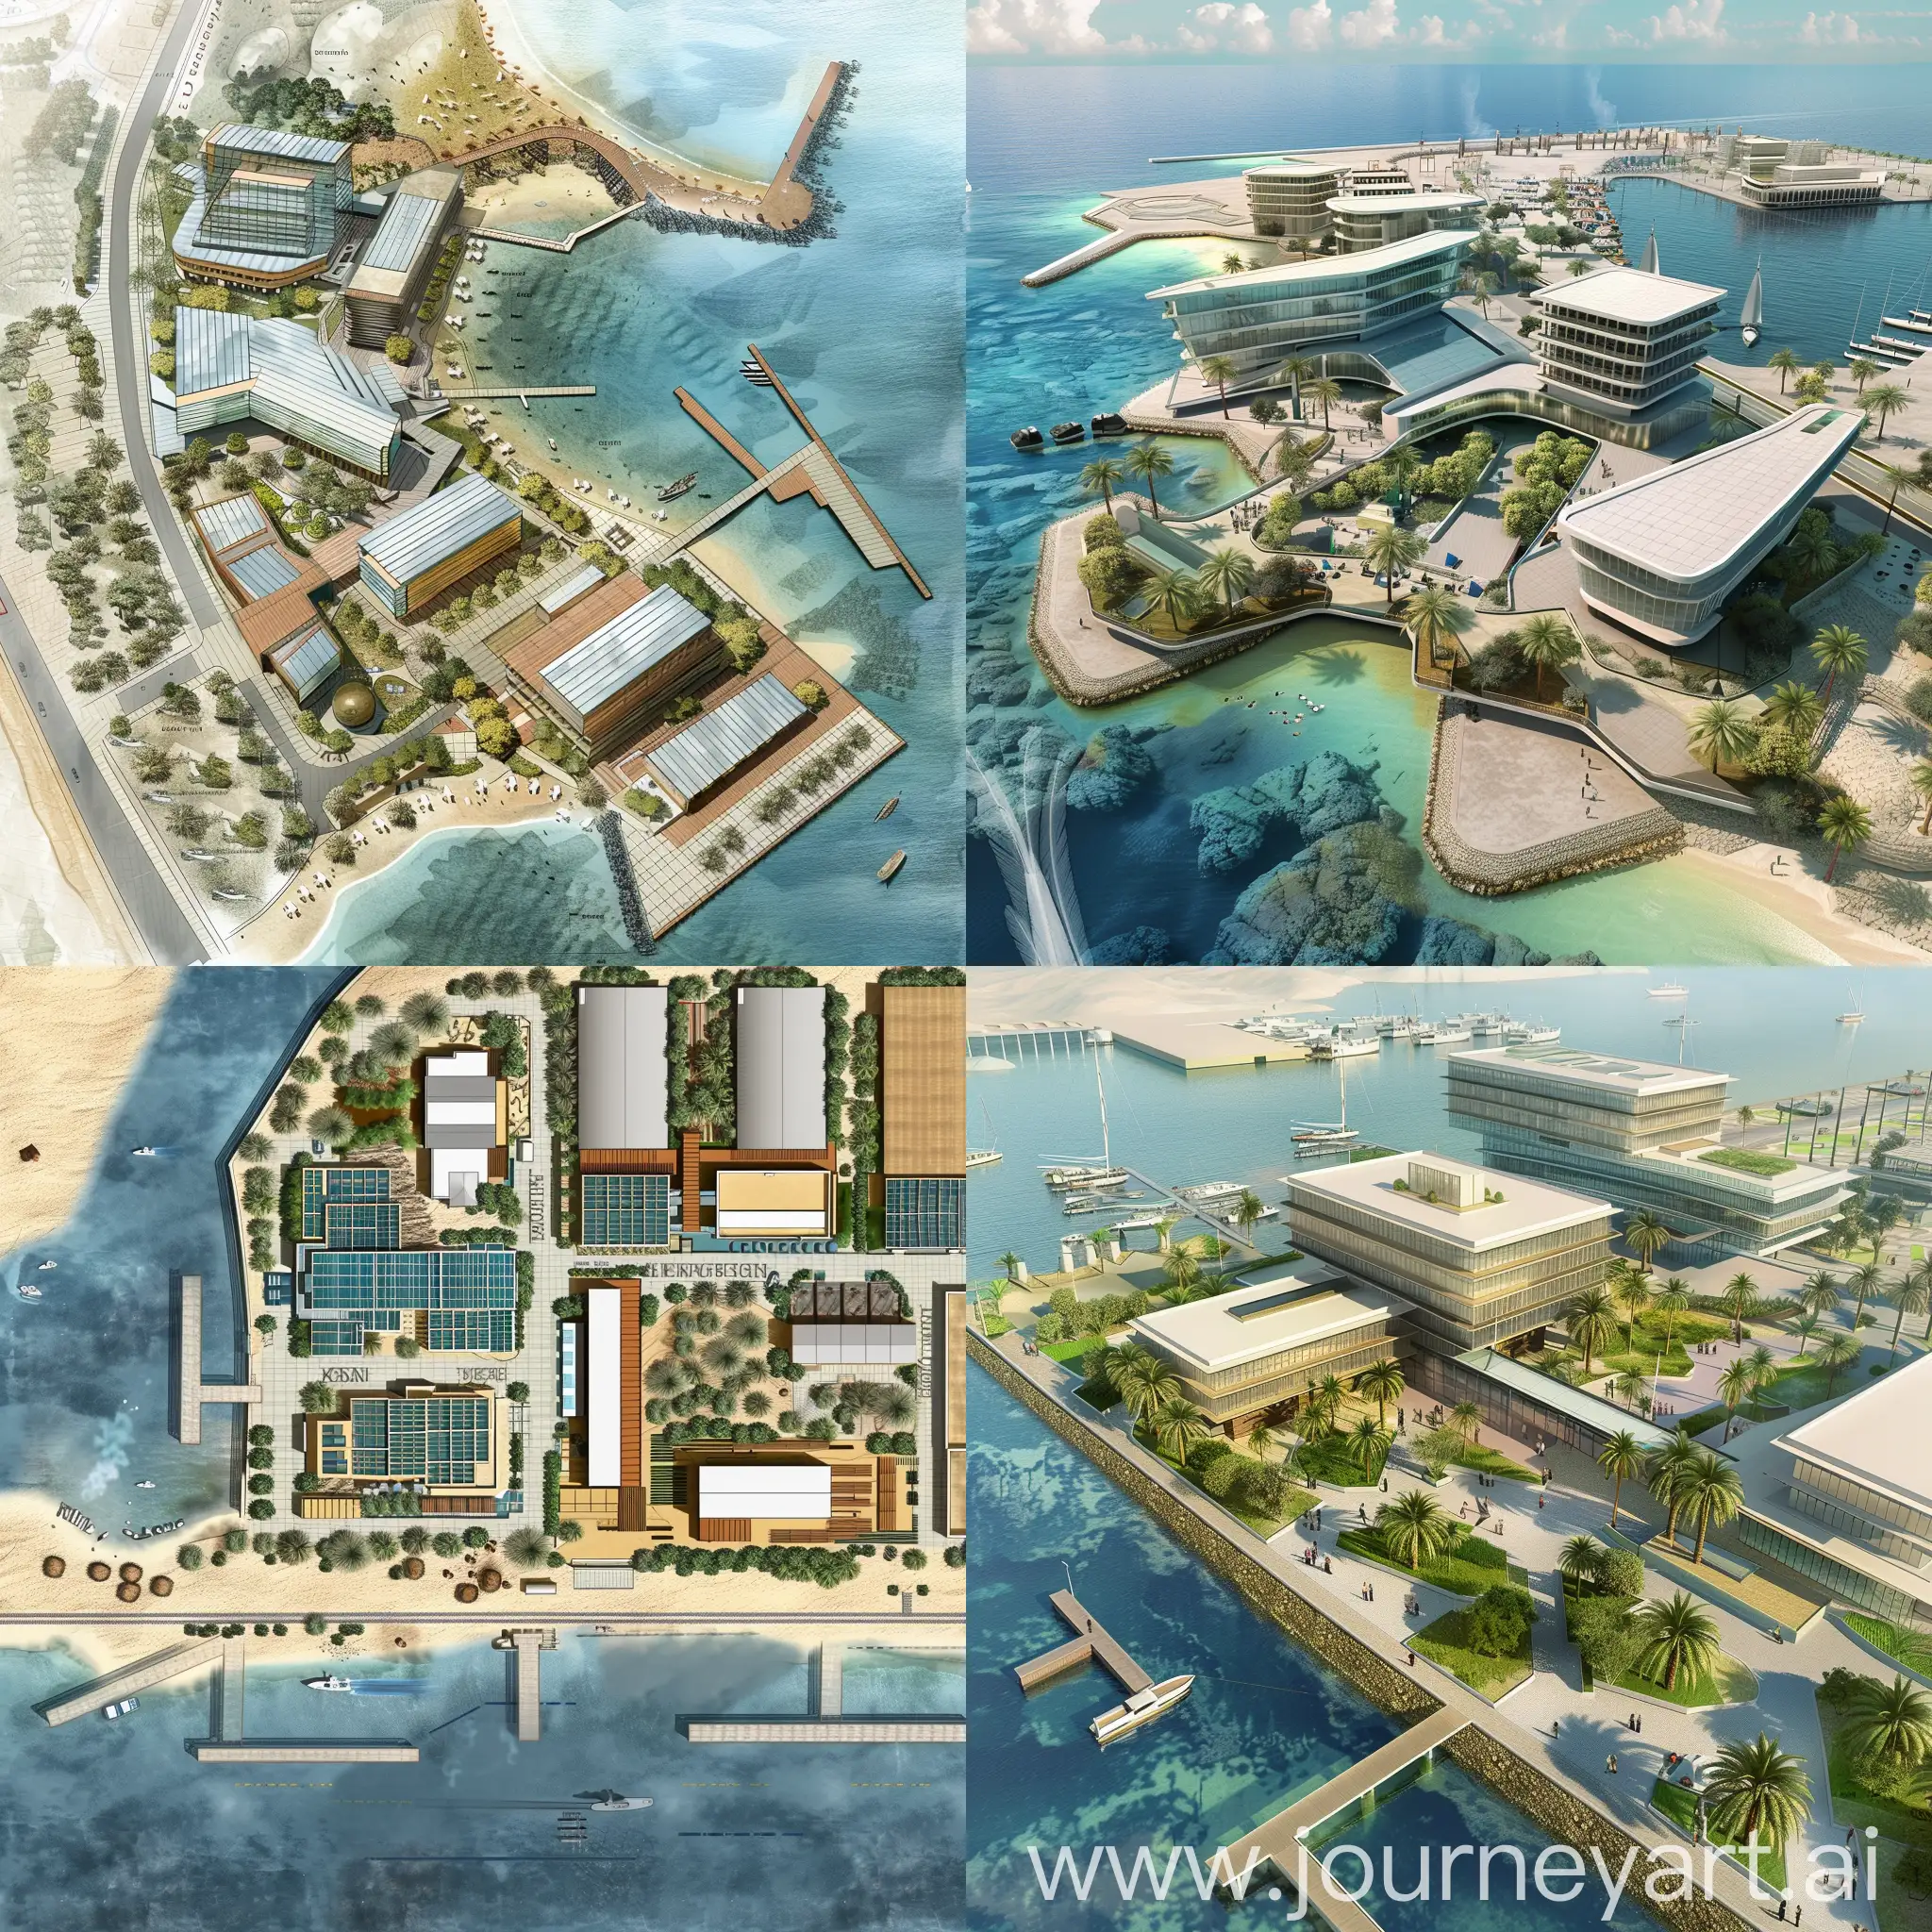 A 2d plan for the architectural concept for the business park in El Quseir is inspired by the region's maritime beauty and diverse commercial activities. The project comprises five buildings: an administrative building, an offices and corporations building, a medical clinic building, a hotel, and an entertainment facility. Located near the El Quseir port in Egypt, the complex aims to leverage the presence of import/export companies and mining offices due to the abundant mining resources in the area.

The proposed architectural theme integrates modernity with maritime elements, featuring a sleek administrative structure with glass facades for a clear sea view. The office building emphasizes open design for collaboration, while the medical clinic building focuses on a calming atmosphere. The hotel incorporates nature-inspired designs, and the entertainment facility is contemporary and multi-functional.

To complement the concept, the addition of a small marina for tourist boats and storage facilities for import/export goods enhances the practicality of the complex. The design promotes sustainability, cultural integration, and efficient utilization of the region's resources. The overall vision is to create a unique and vibrant environment that caters to various needs while harmonizing with the coastal surroundings in El Quseir.